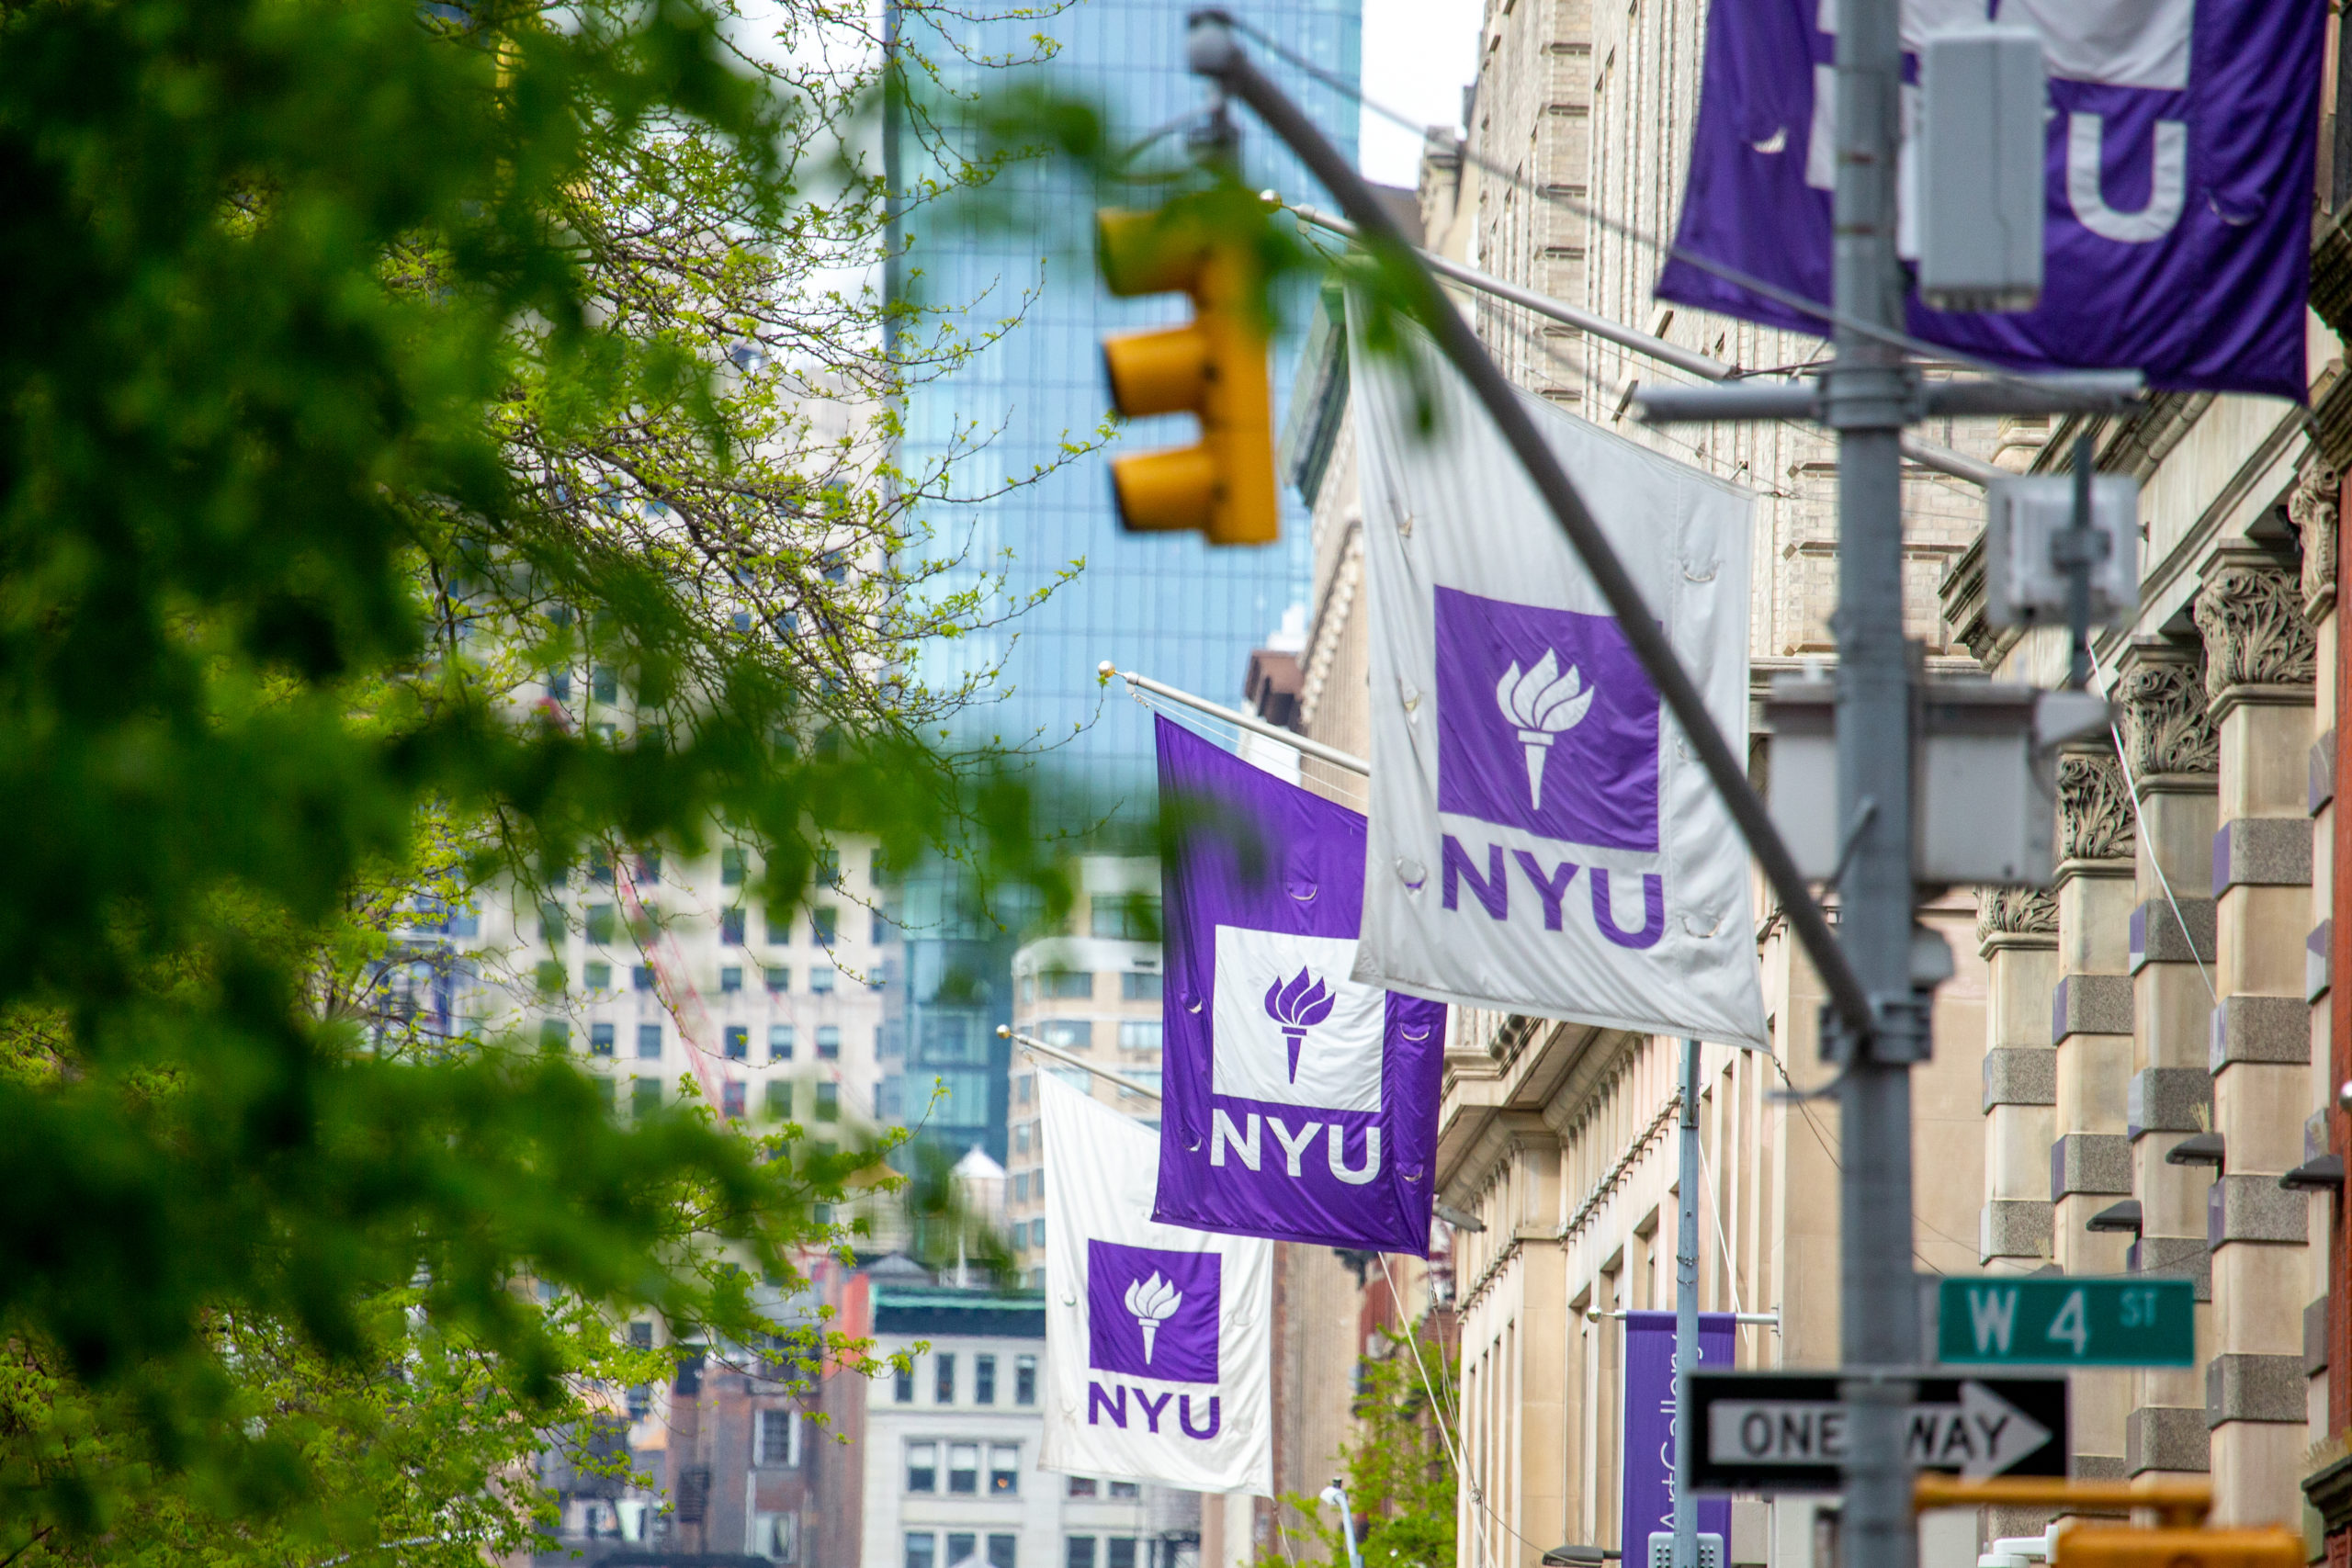 A series of NYU flags on buildings in New York City.